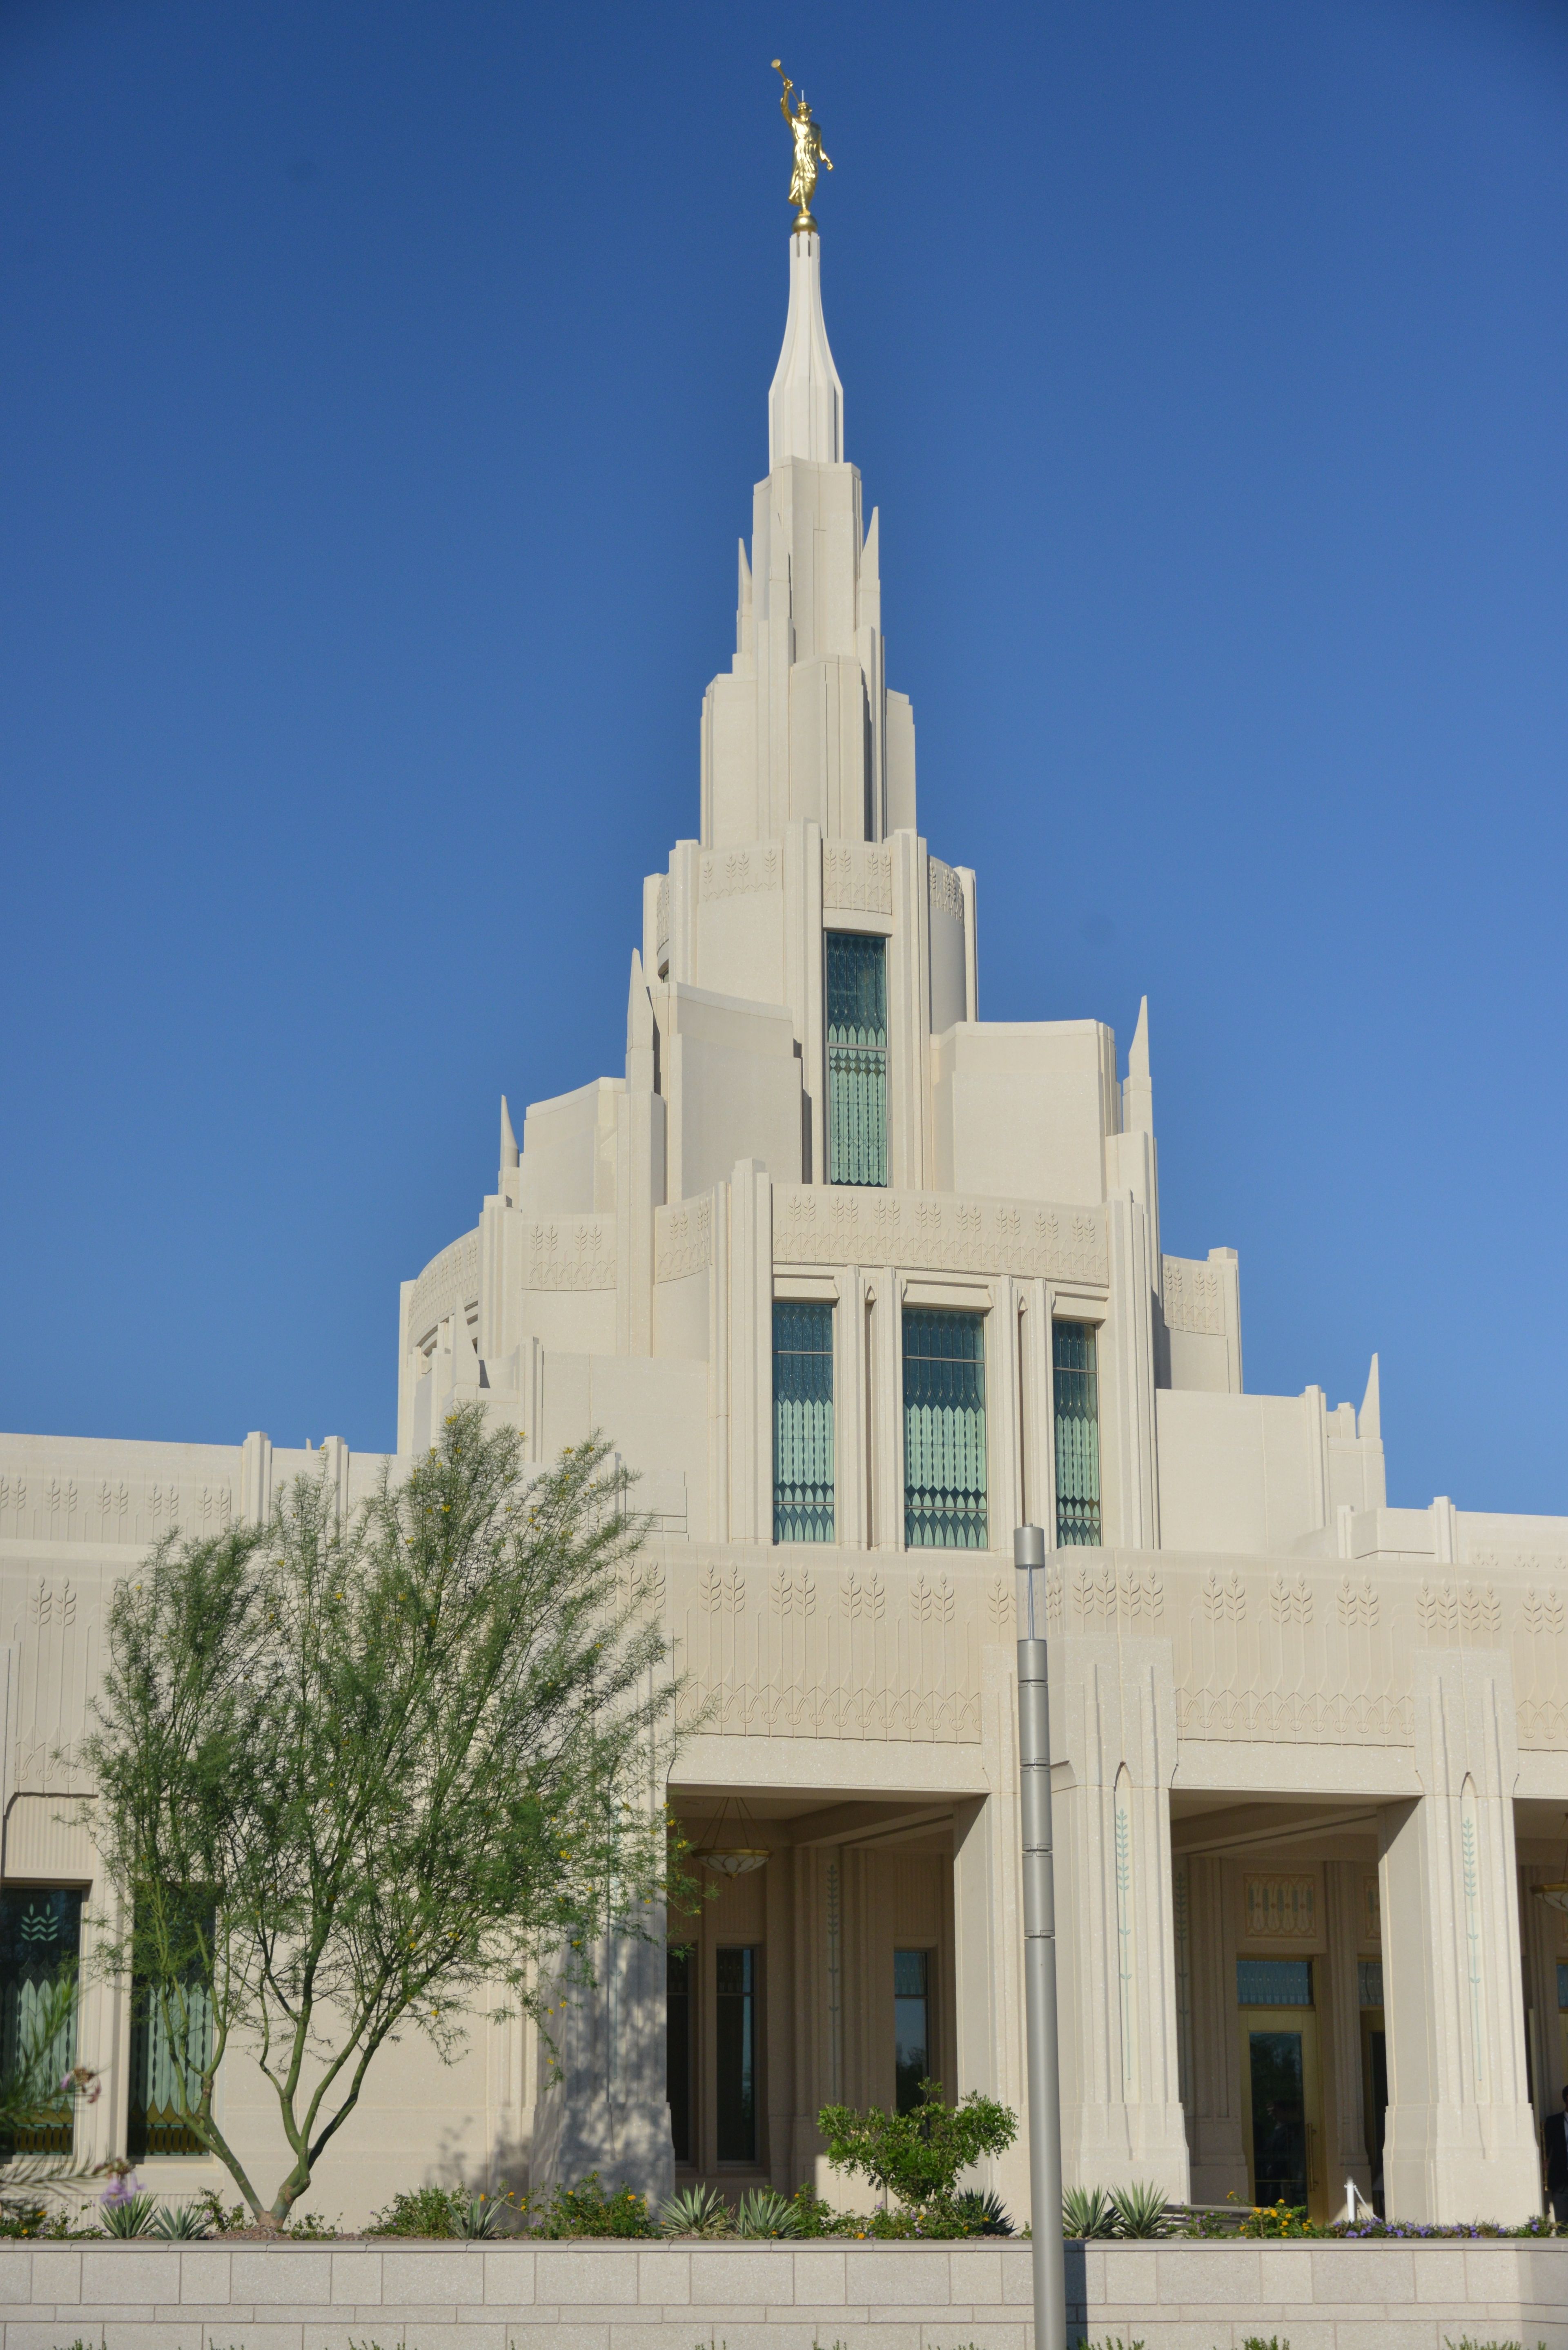 A view of the Phoenix Arizona Temple entrance and spire.